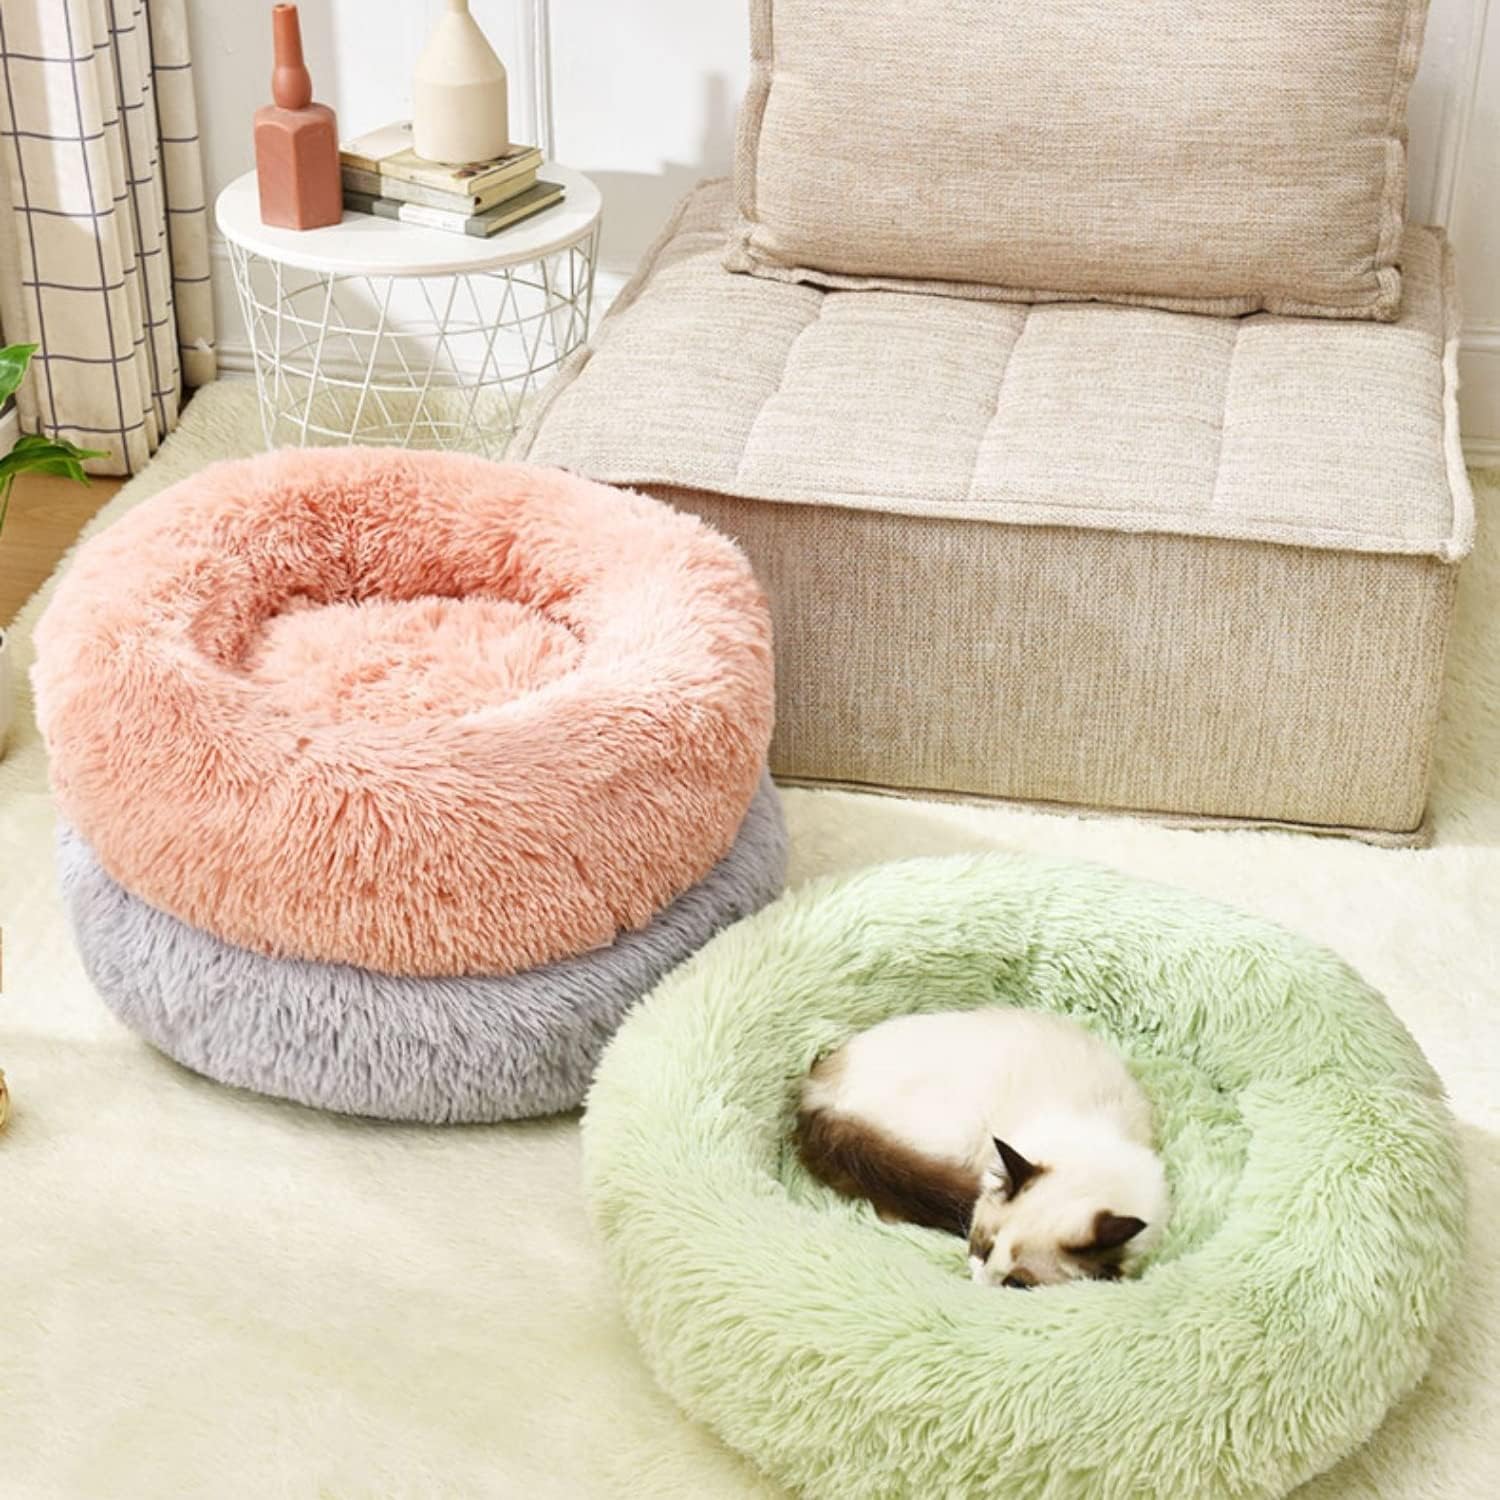 Geizire Cat Beds for Indoor Cats/Dog Beds for Small Dogs, Washable Donut Calming Round Cat Bed, Soft Fluffy Warm and Cozy Anti Anxiety Cuddler Cat Bed, Joint-Relief Cat Bed (Medium, Brown)